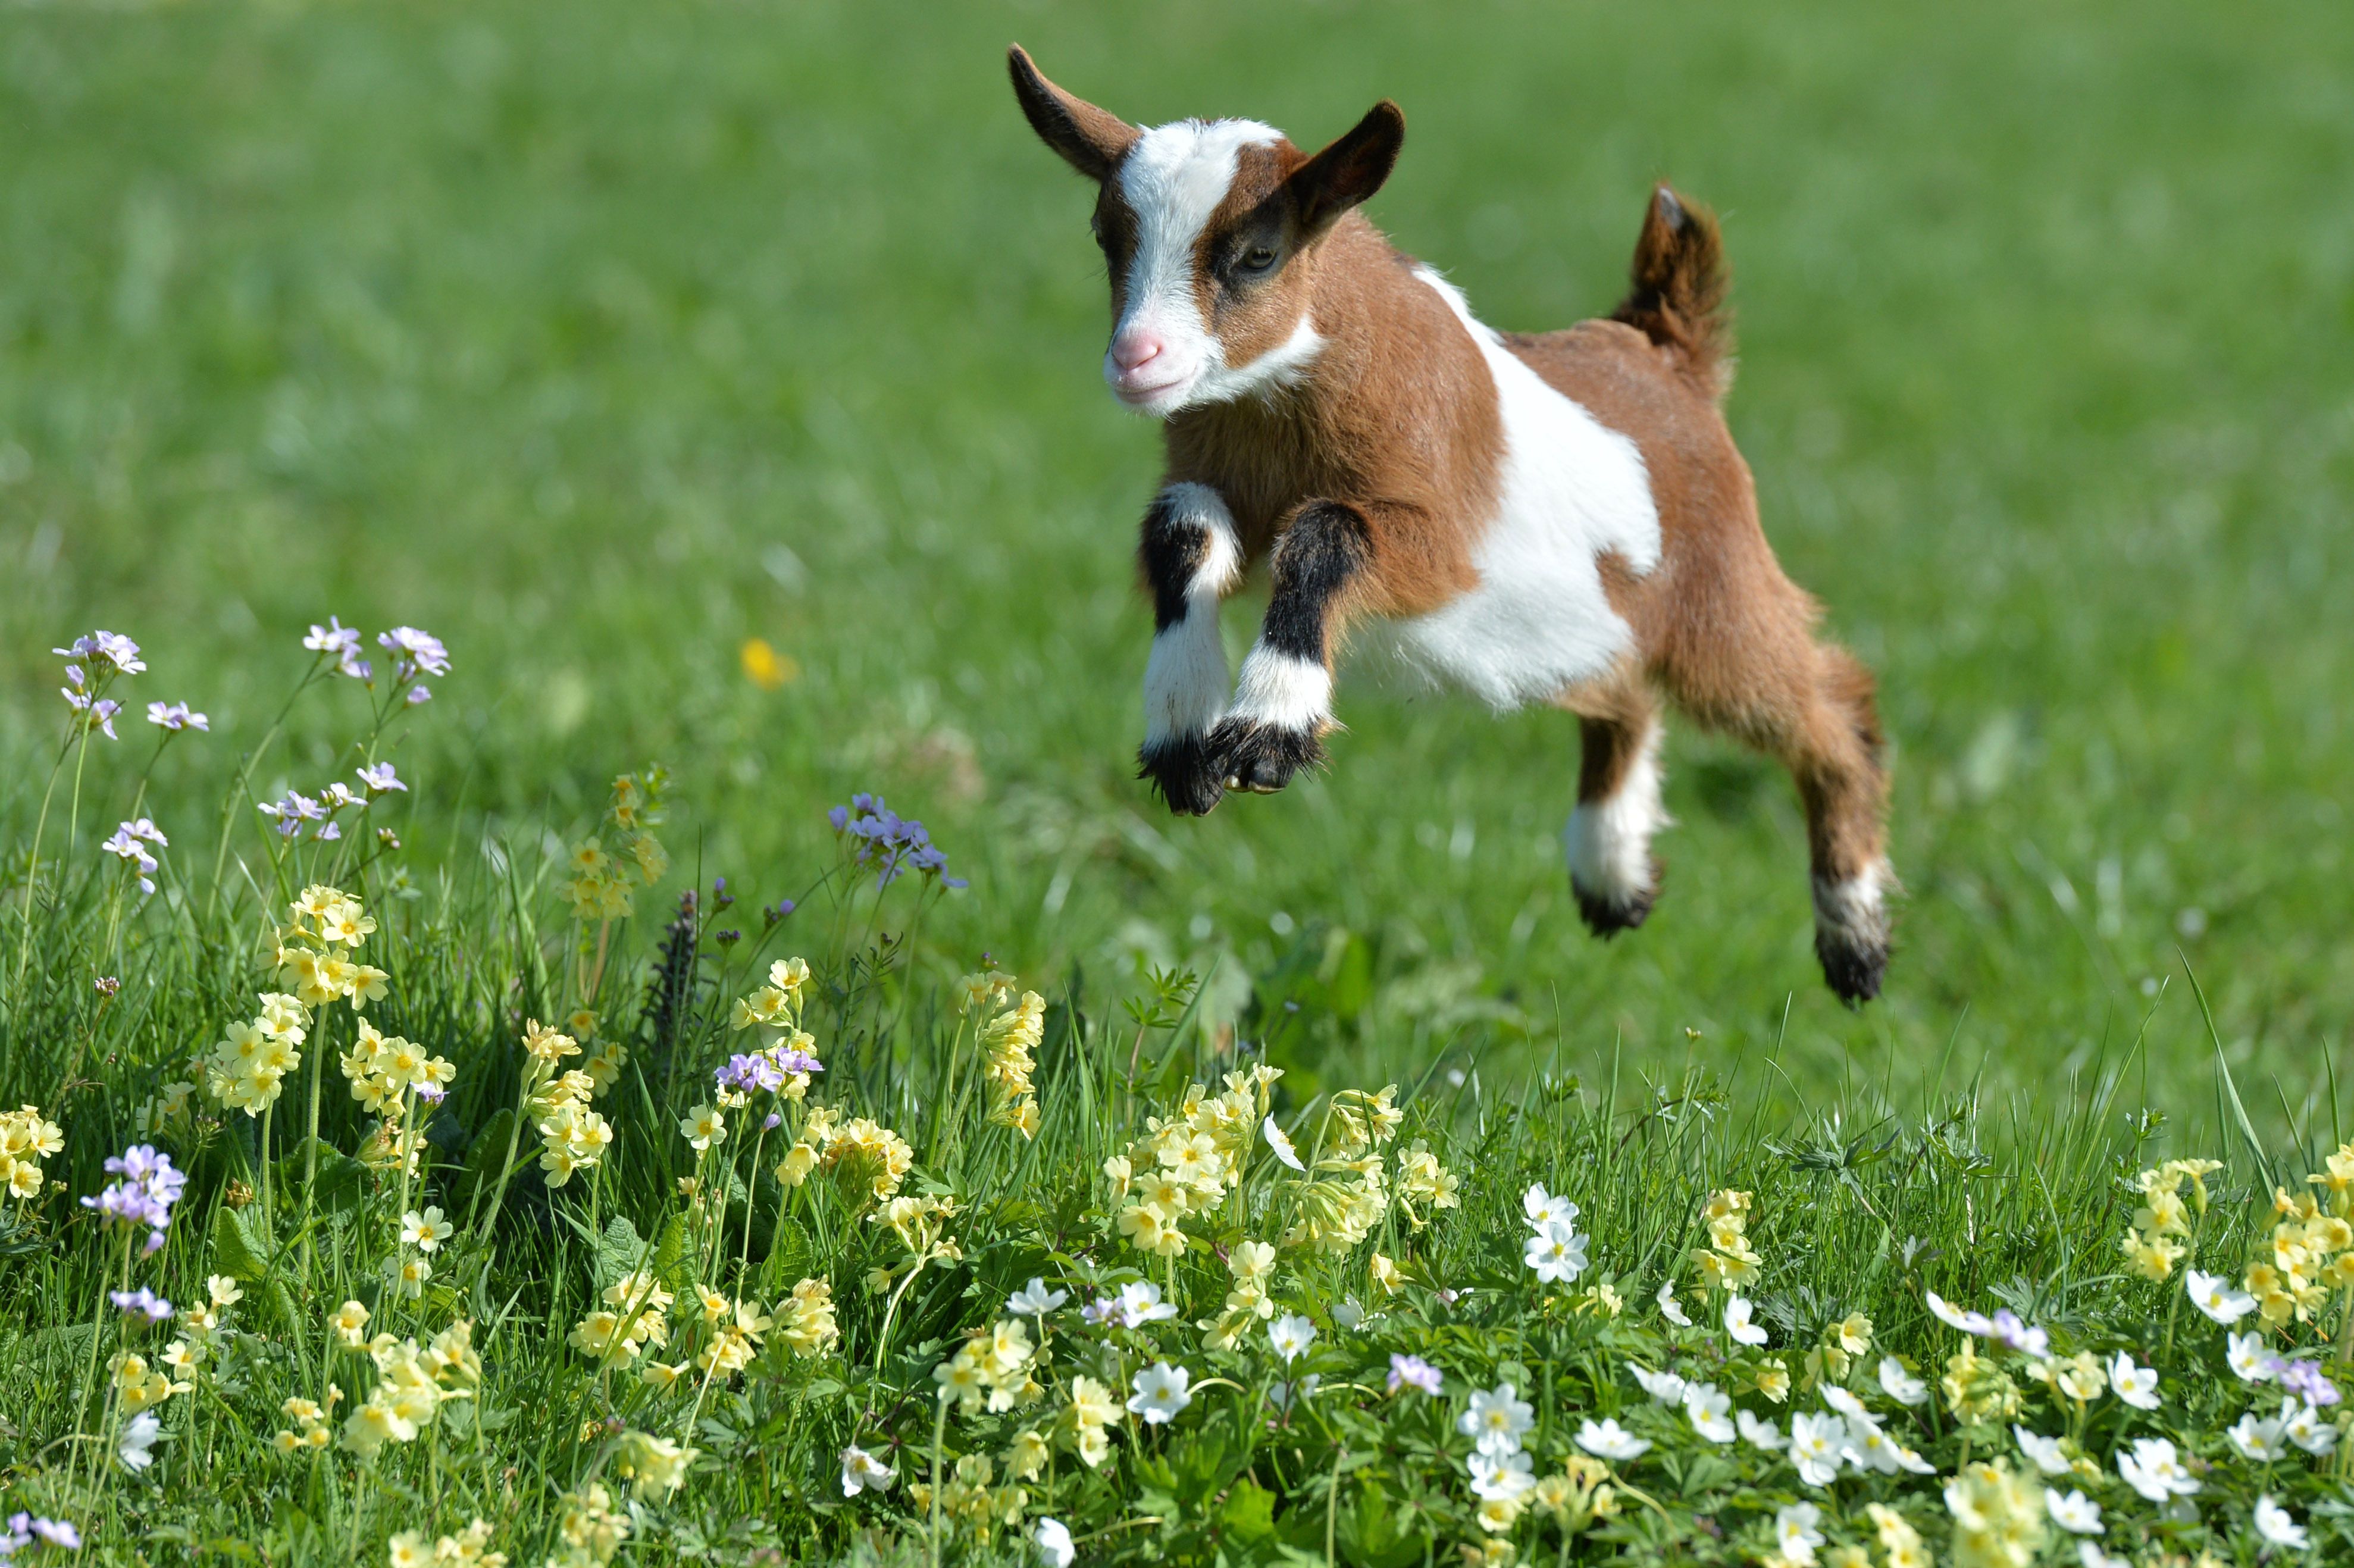 Goat escapes from home and is on the run